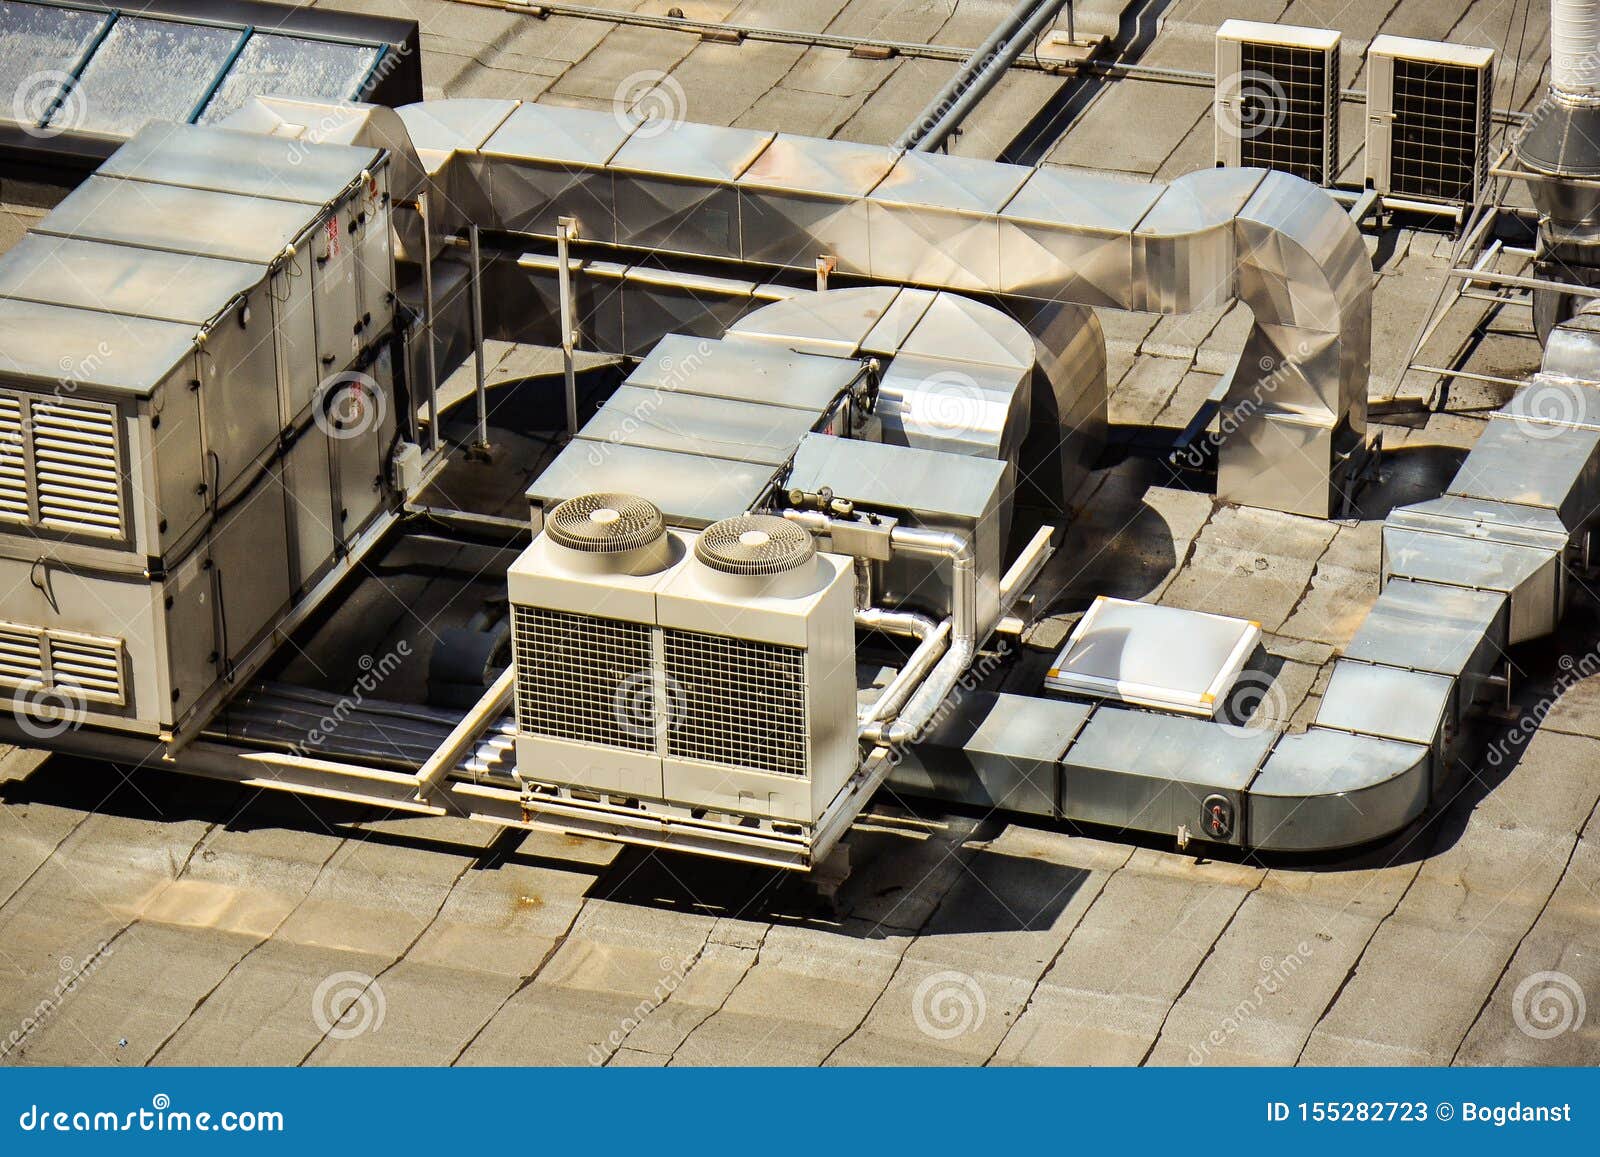 HVAC Heating Ventilation And Air Conditioning System On Building Rooftop Stock Image Image